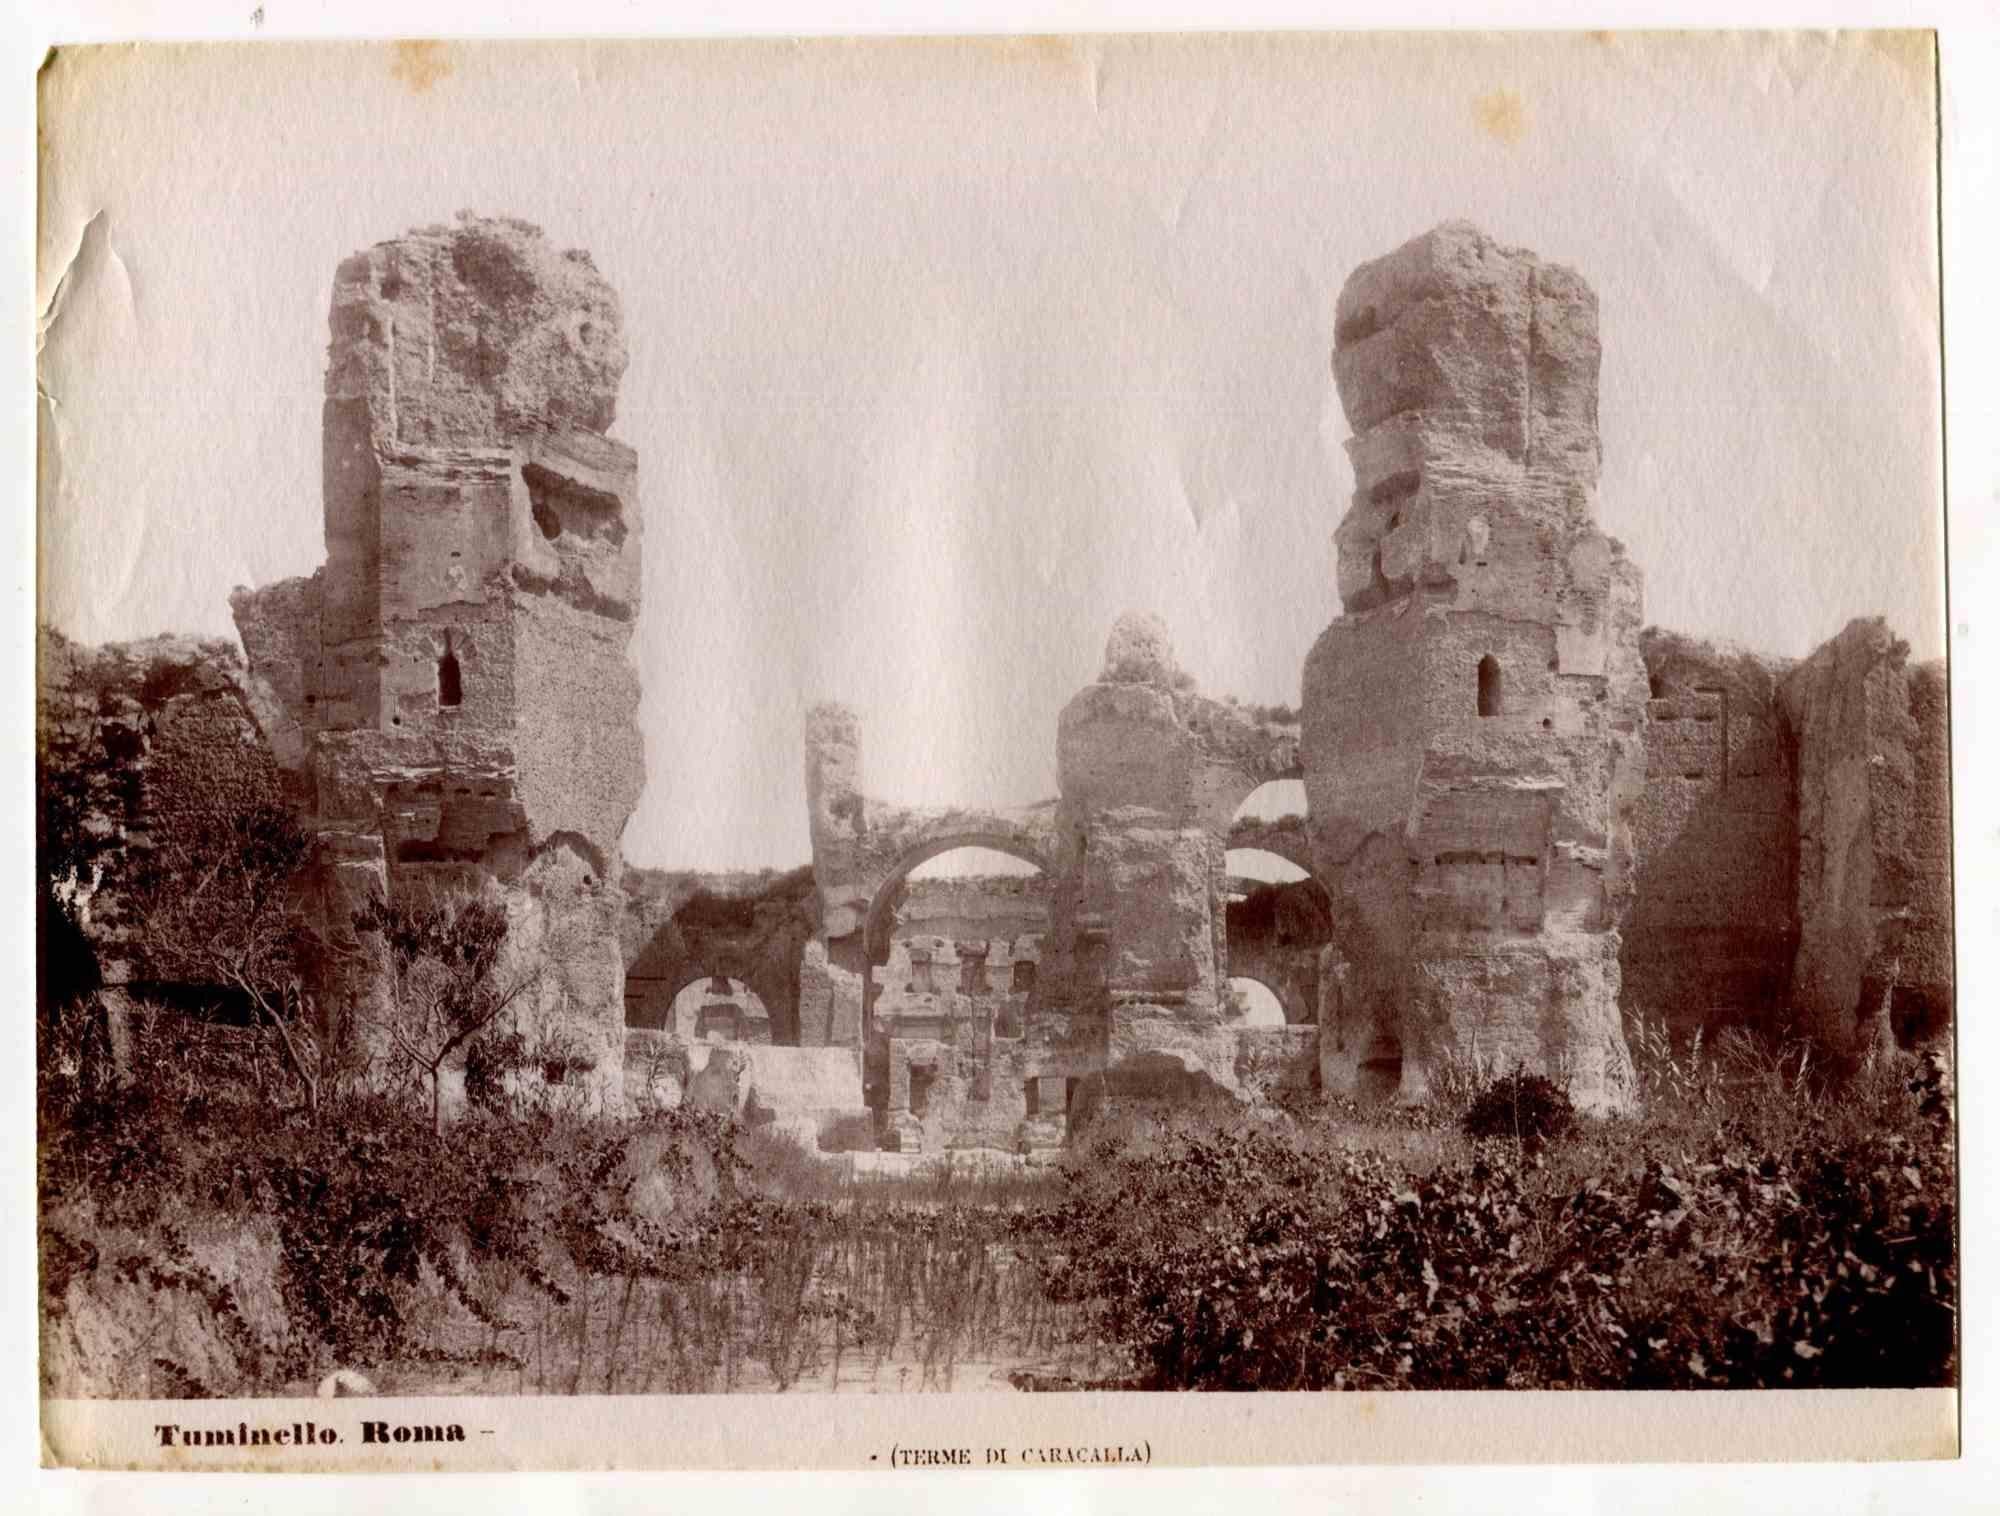 Unknown Figurative Photograph - Baths of Caracalla - Vintage Photo - Early 20th Century